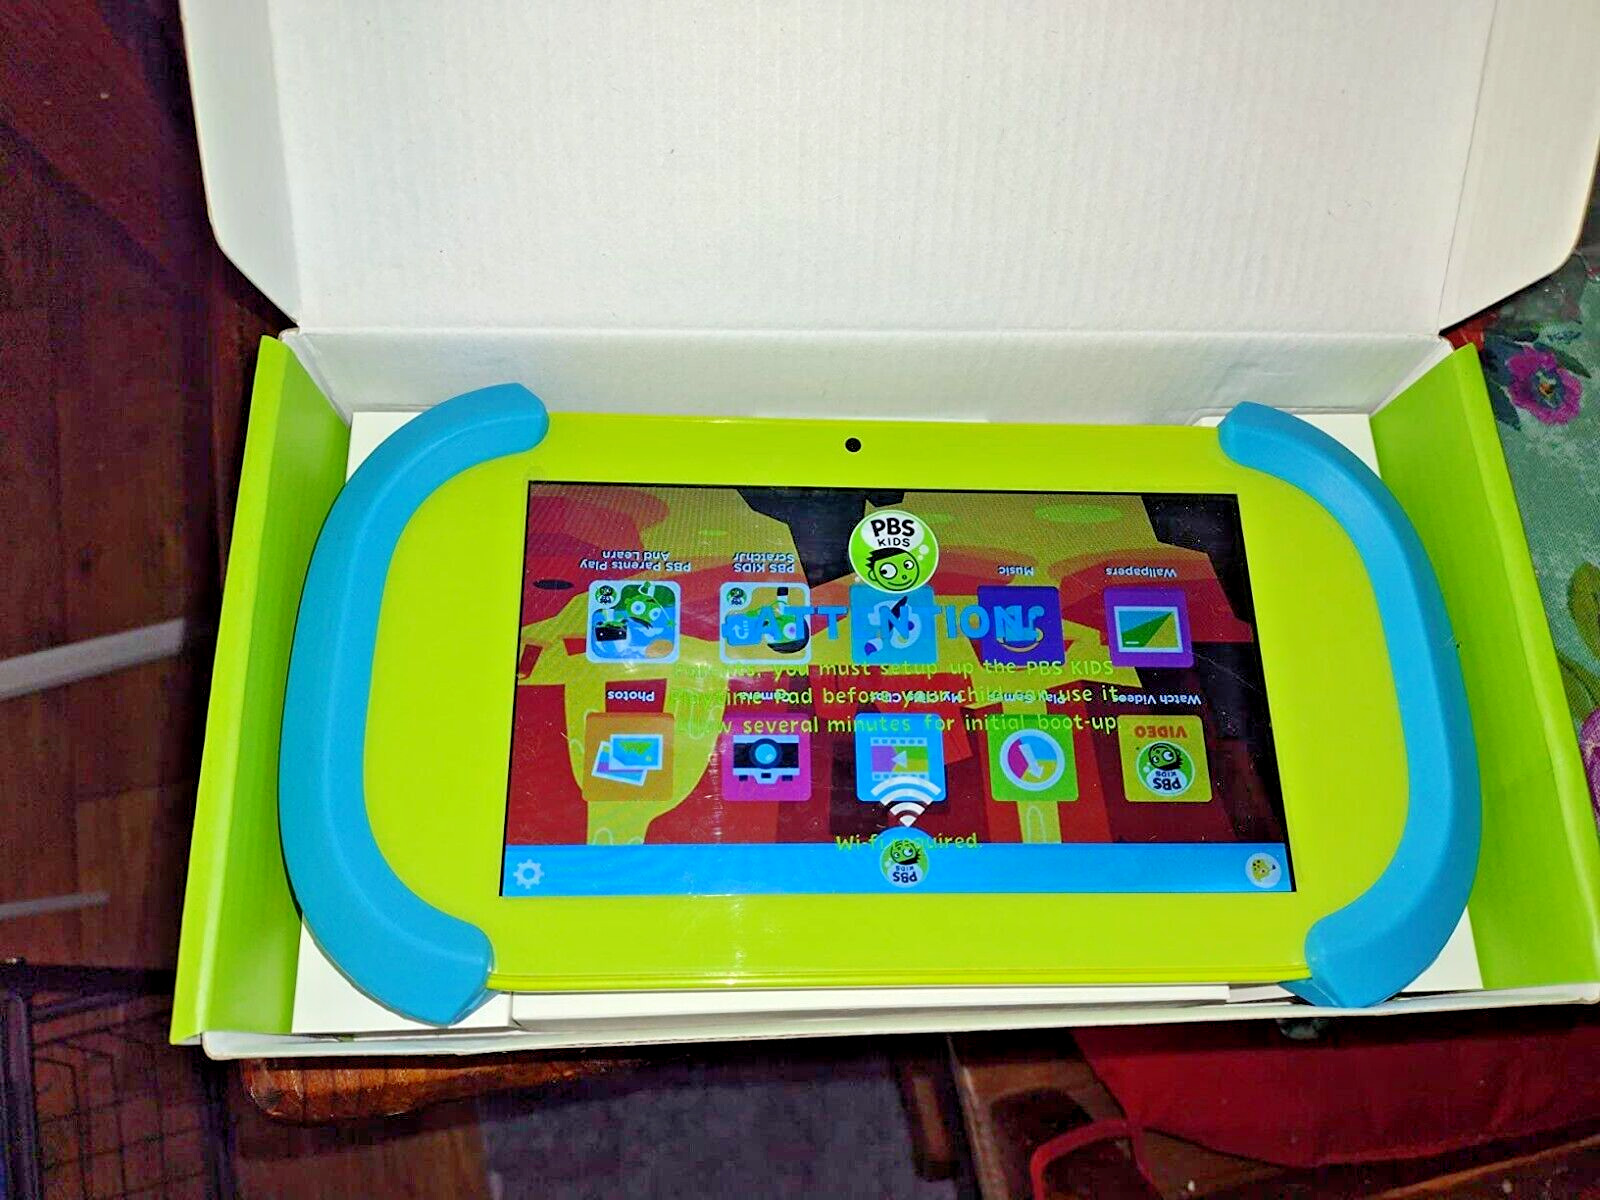 PBS Kids PBKRWM5410 Playtime Pad 7-Inch HD Kids with Bluetooth and Front NEW